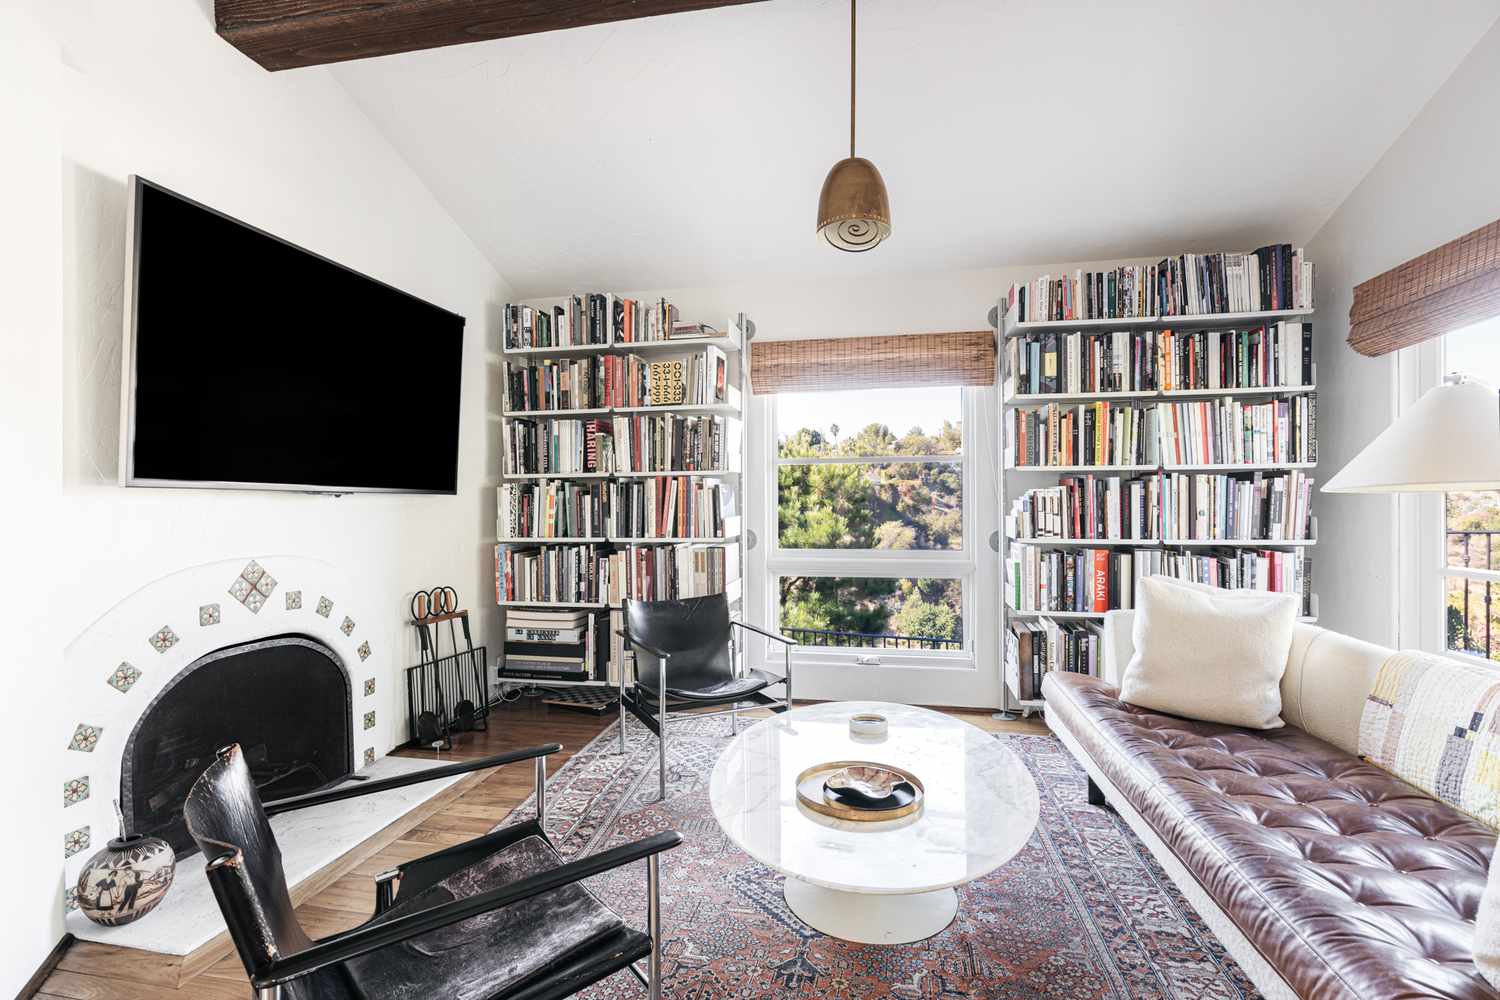 Large tv mounted on wall above small fireplace in living room with open book shelves